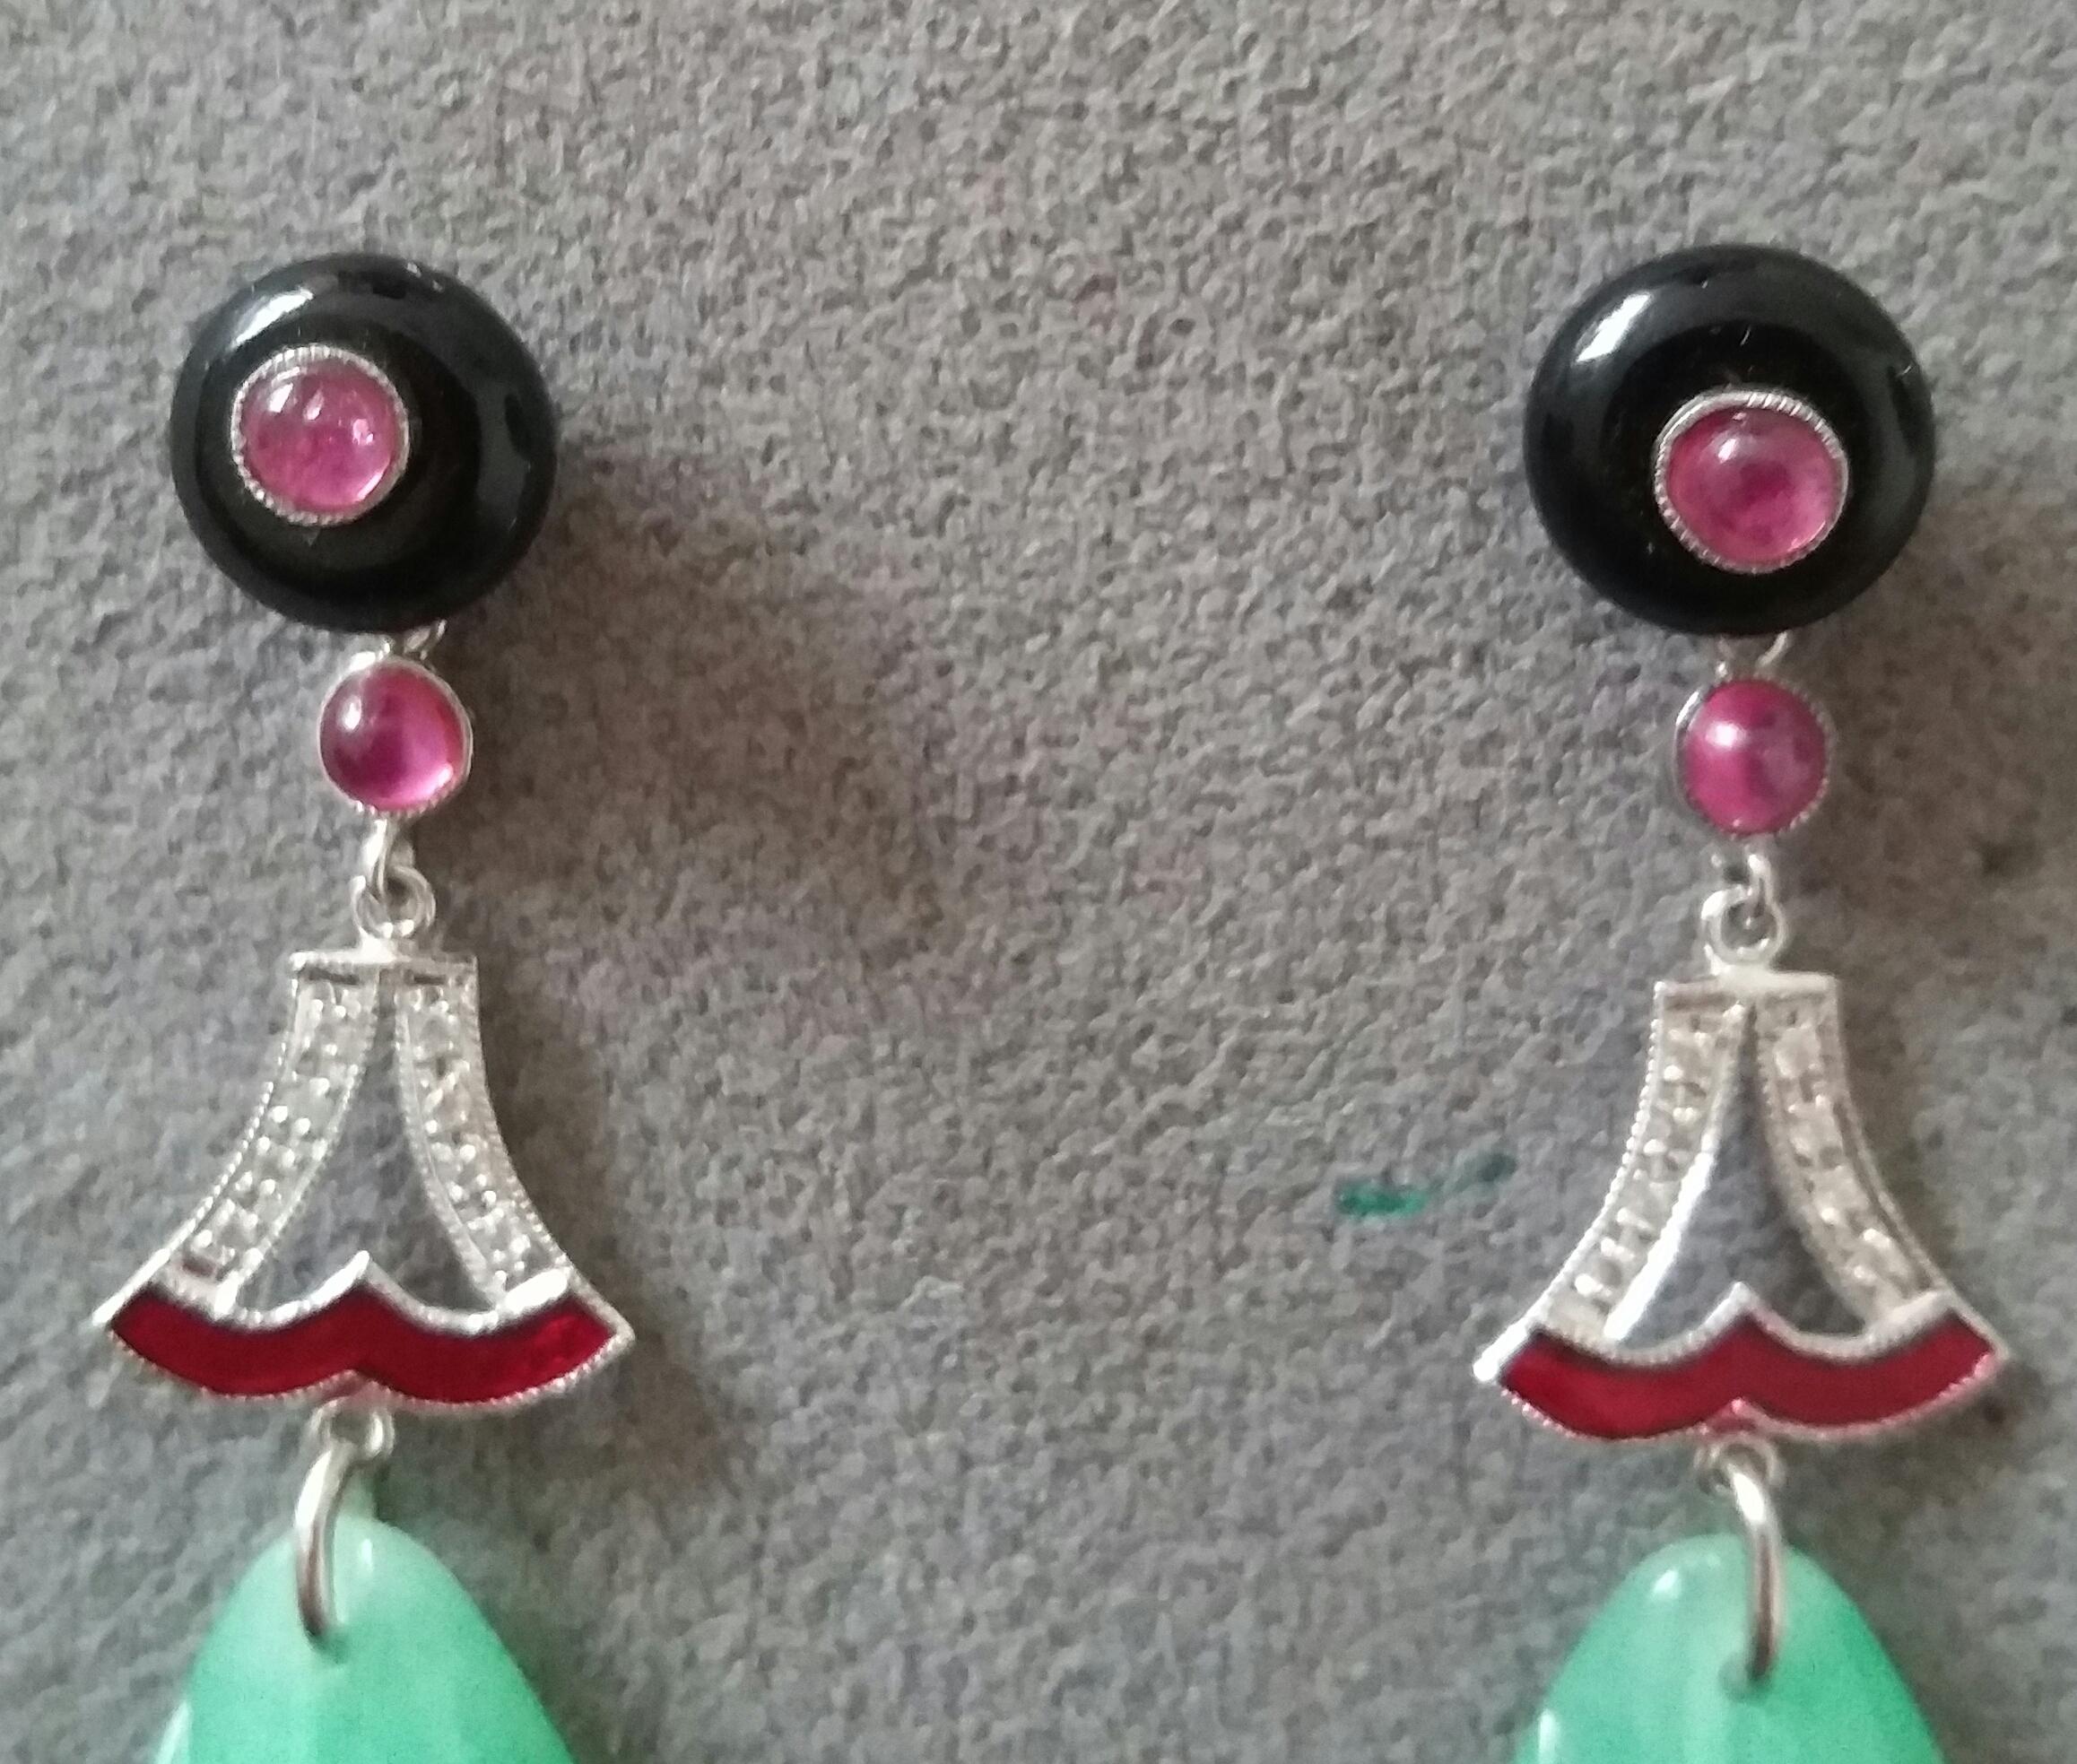 A pair of elegant  classic Art Deco style earrings, with an upper part consisting of 2 black onyx buttons with in the center 2 small round ruby cabochons, in the central part where we have 2 elements in white gold, diamonds and red enamel,that